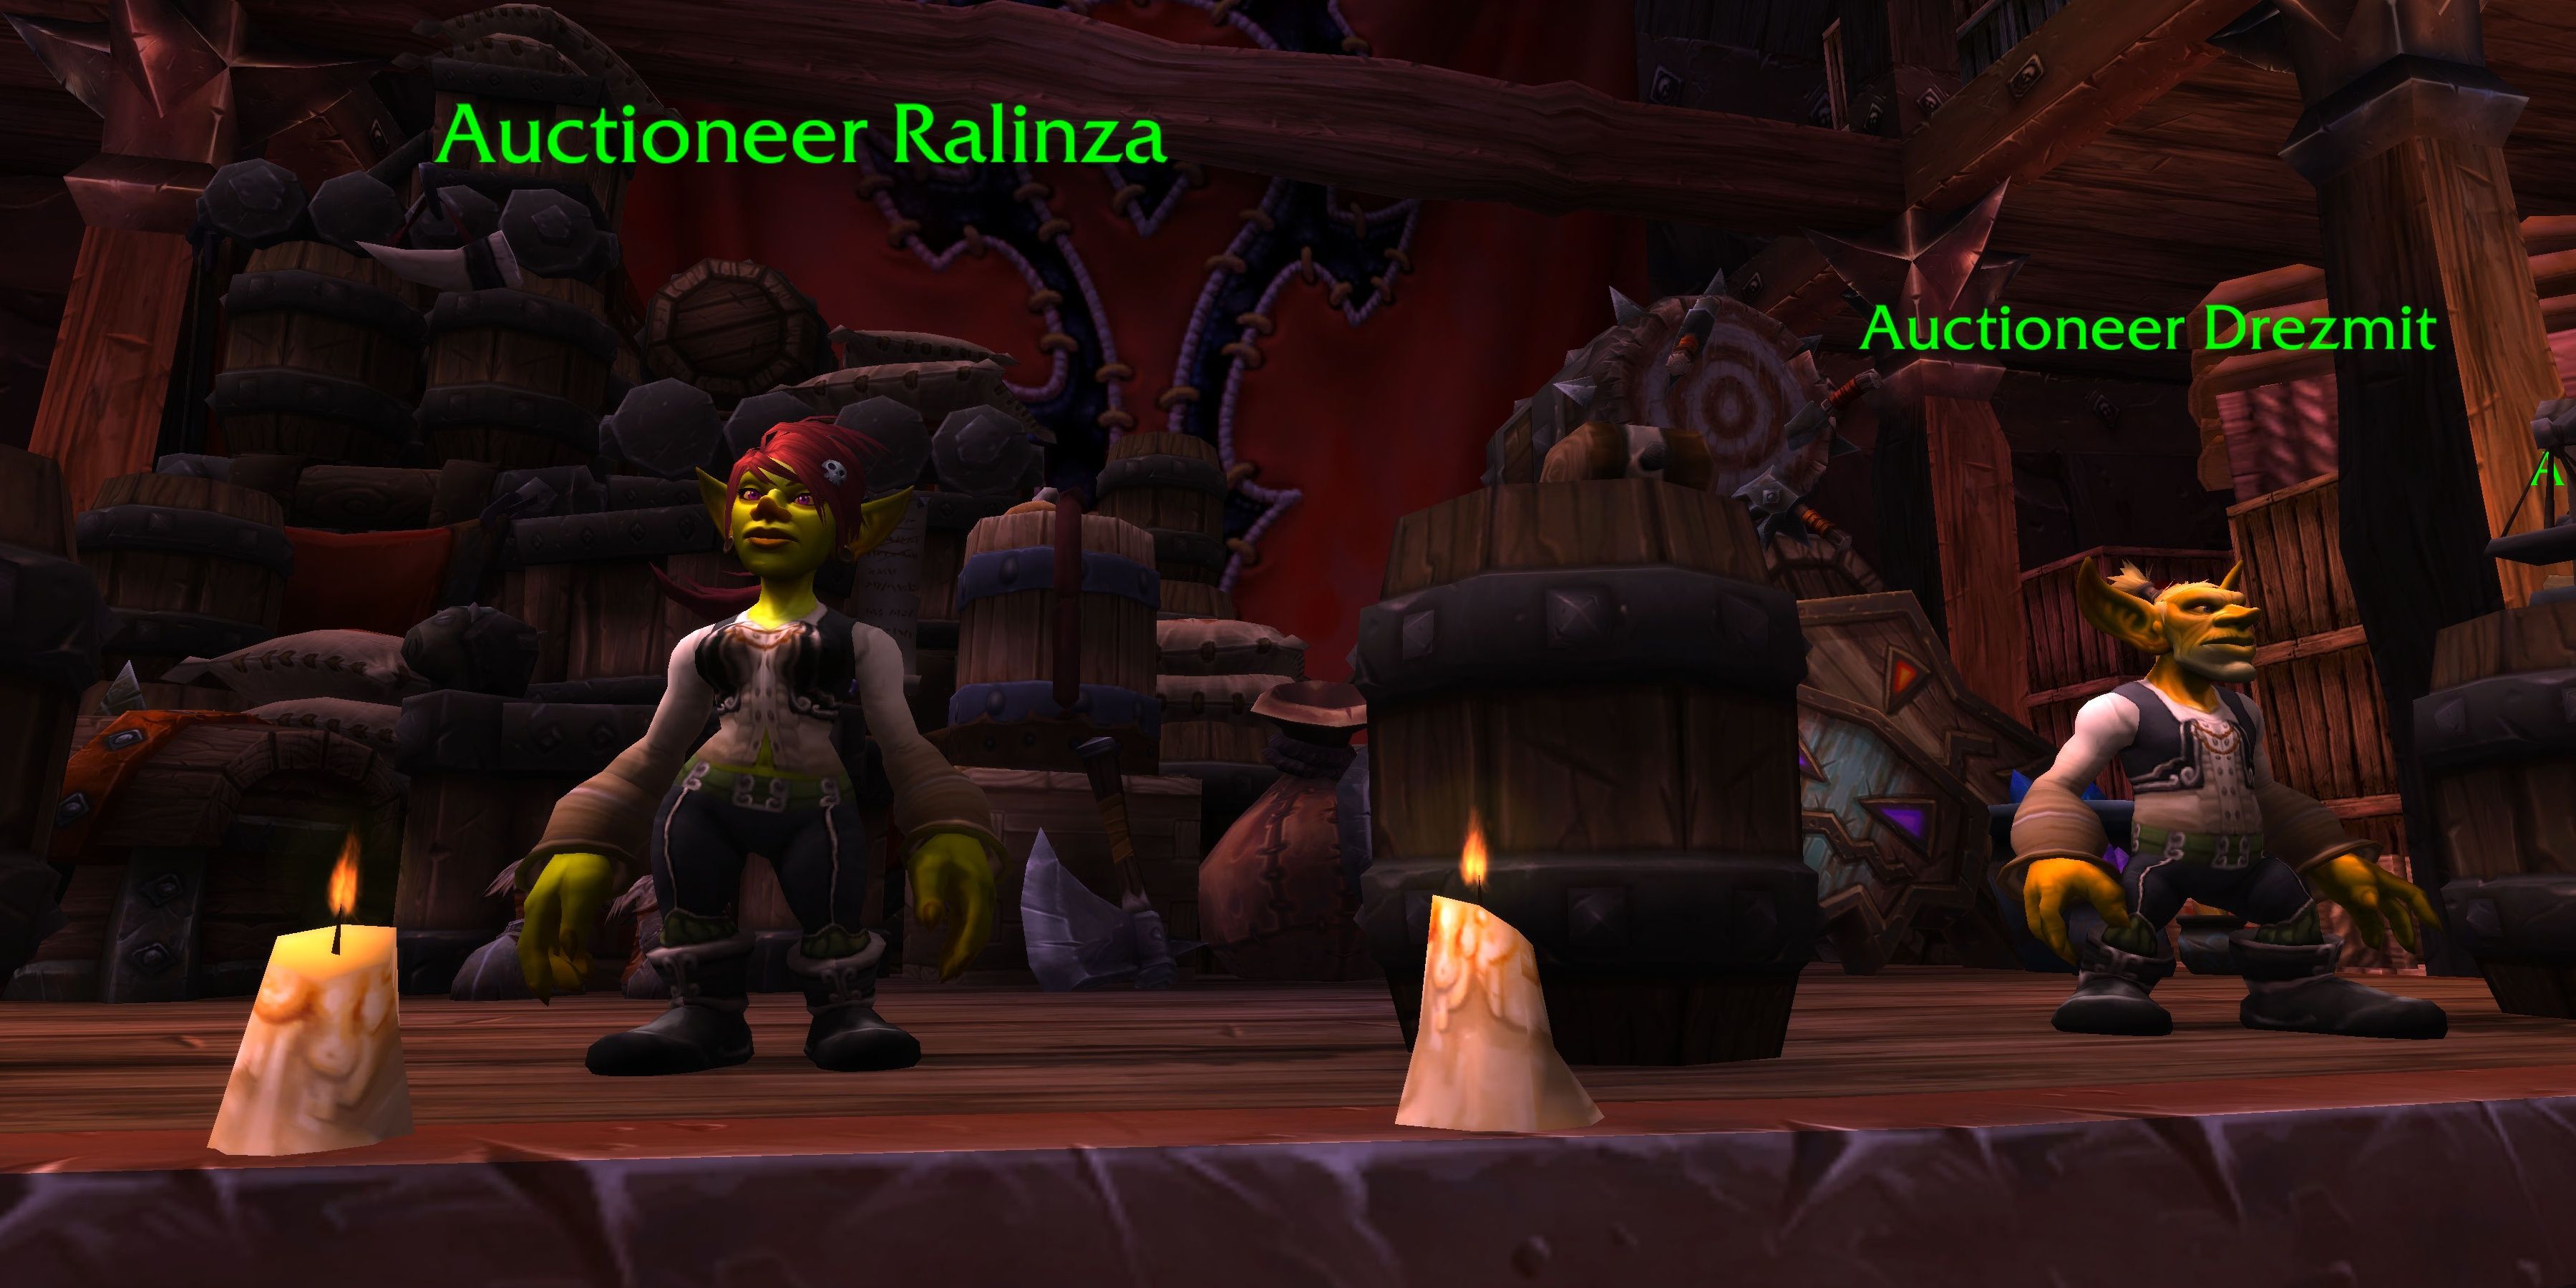 Goblin Auctioneer NPC at Orgrimmar Auction House